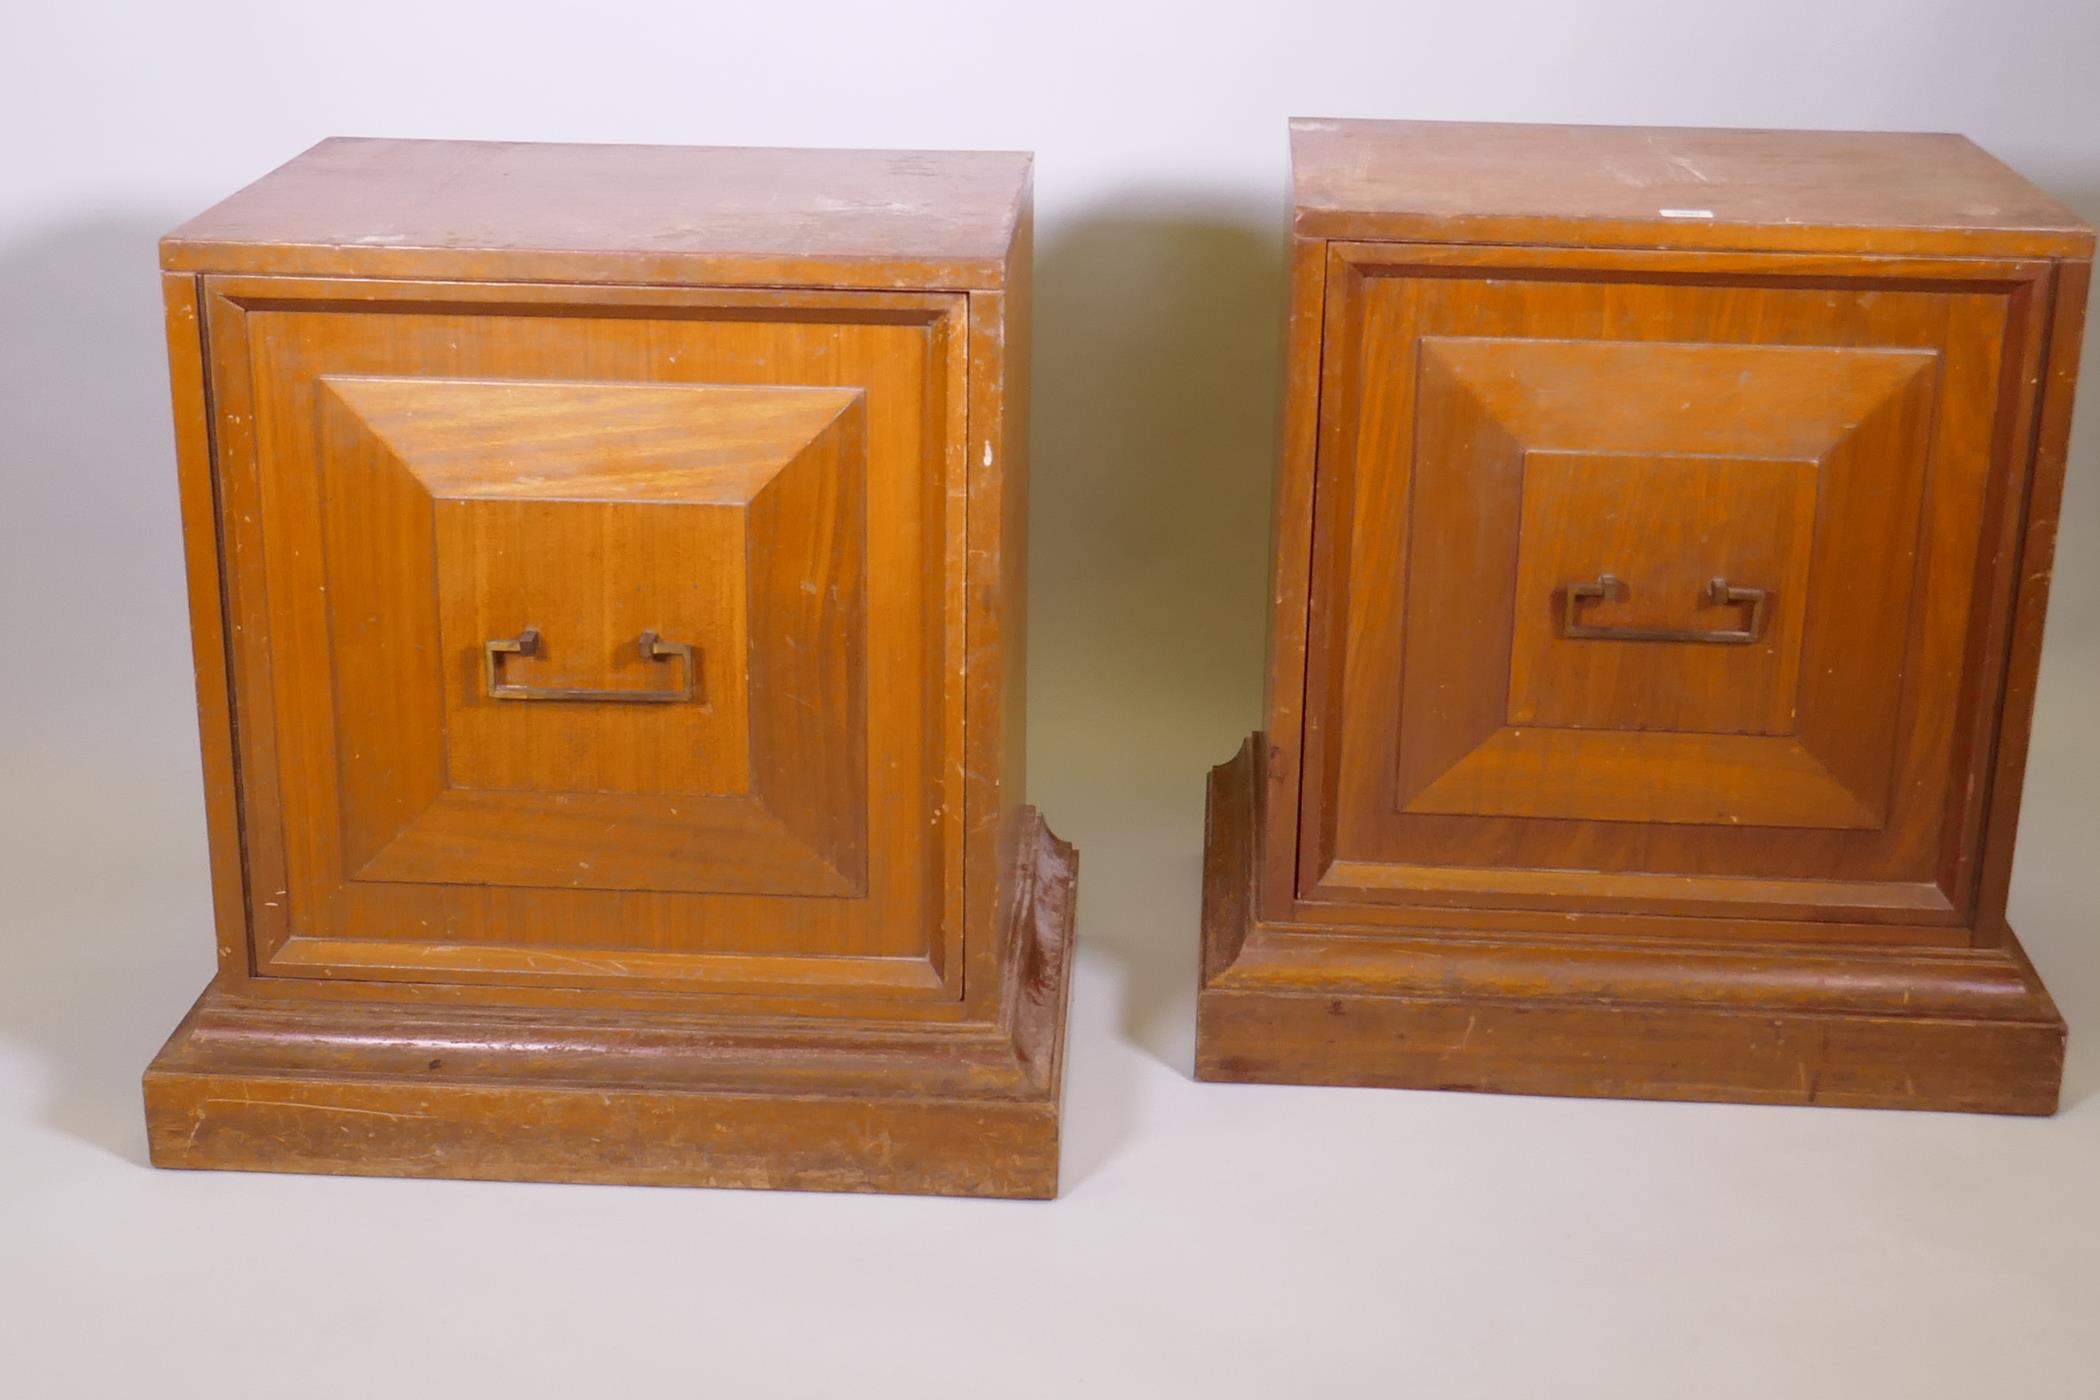 A pair of Younger mahogany pedestal cabinets, with moulded doors and plinth bases, 28" x 20" x 28" - Image 4 of 5